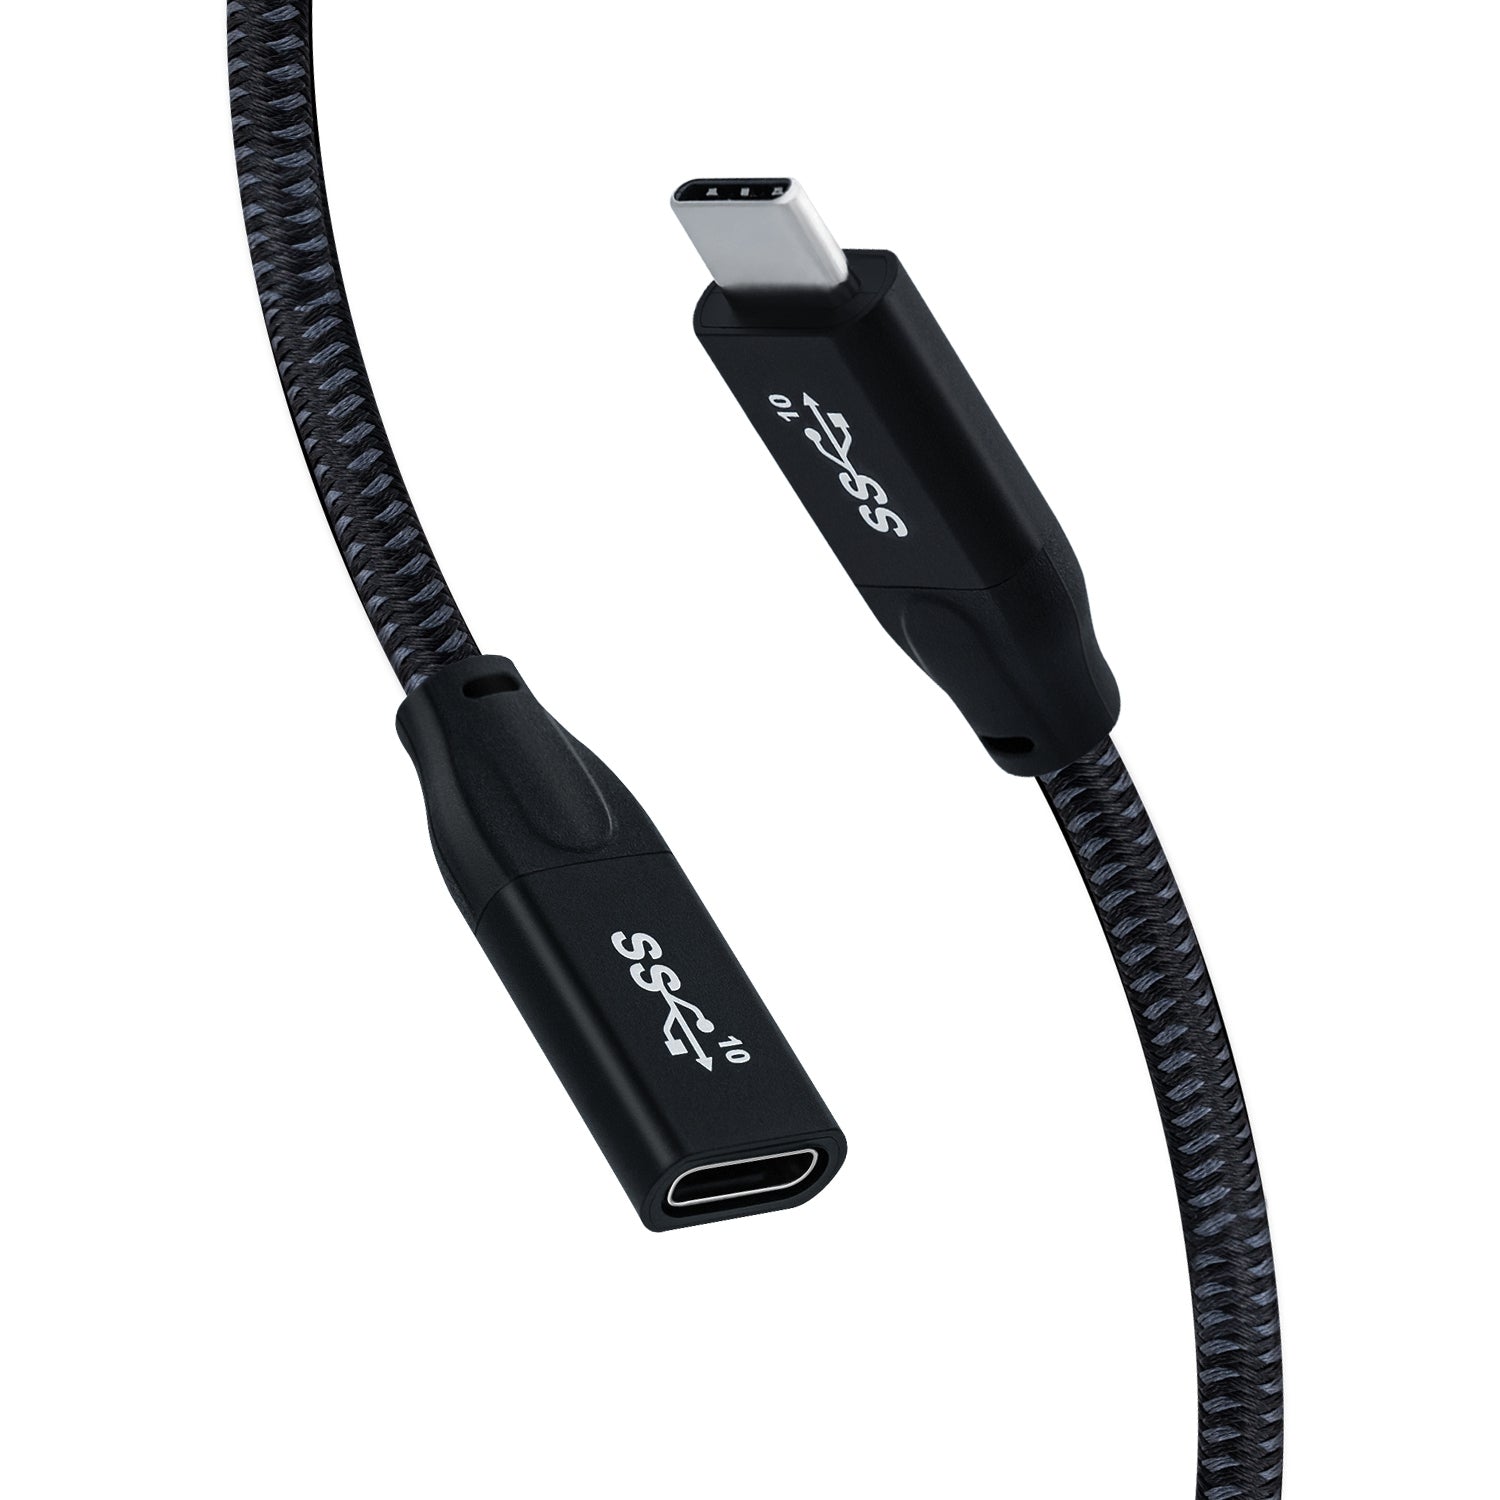 Gaming-0.6M USB 3.1 10Gbps Type-C Extension Cable for Nintendo Switch/Switch OLED/Oculus Quest/Oculus  Quest 3/Laptop